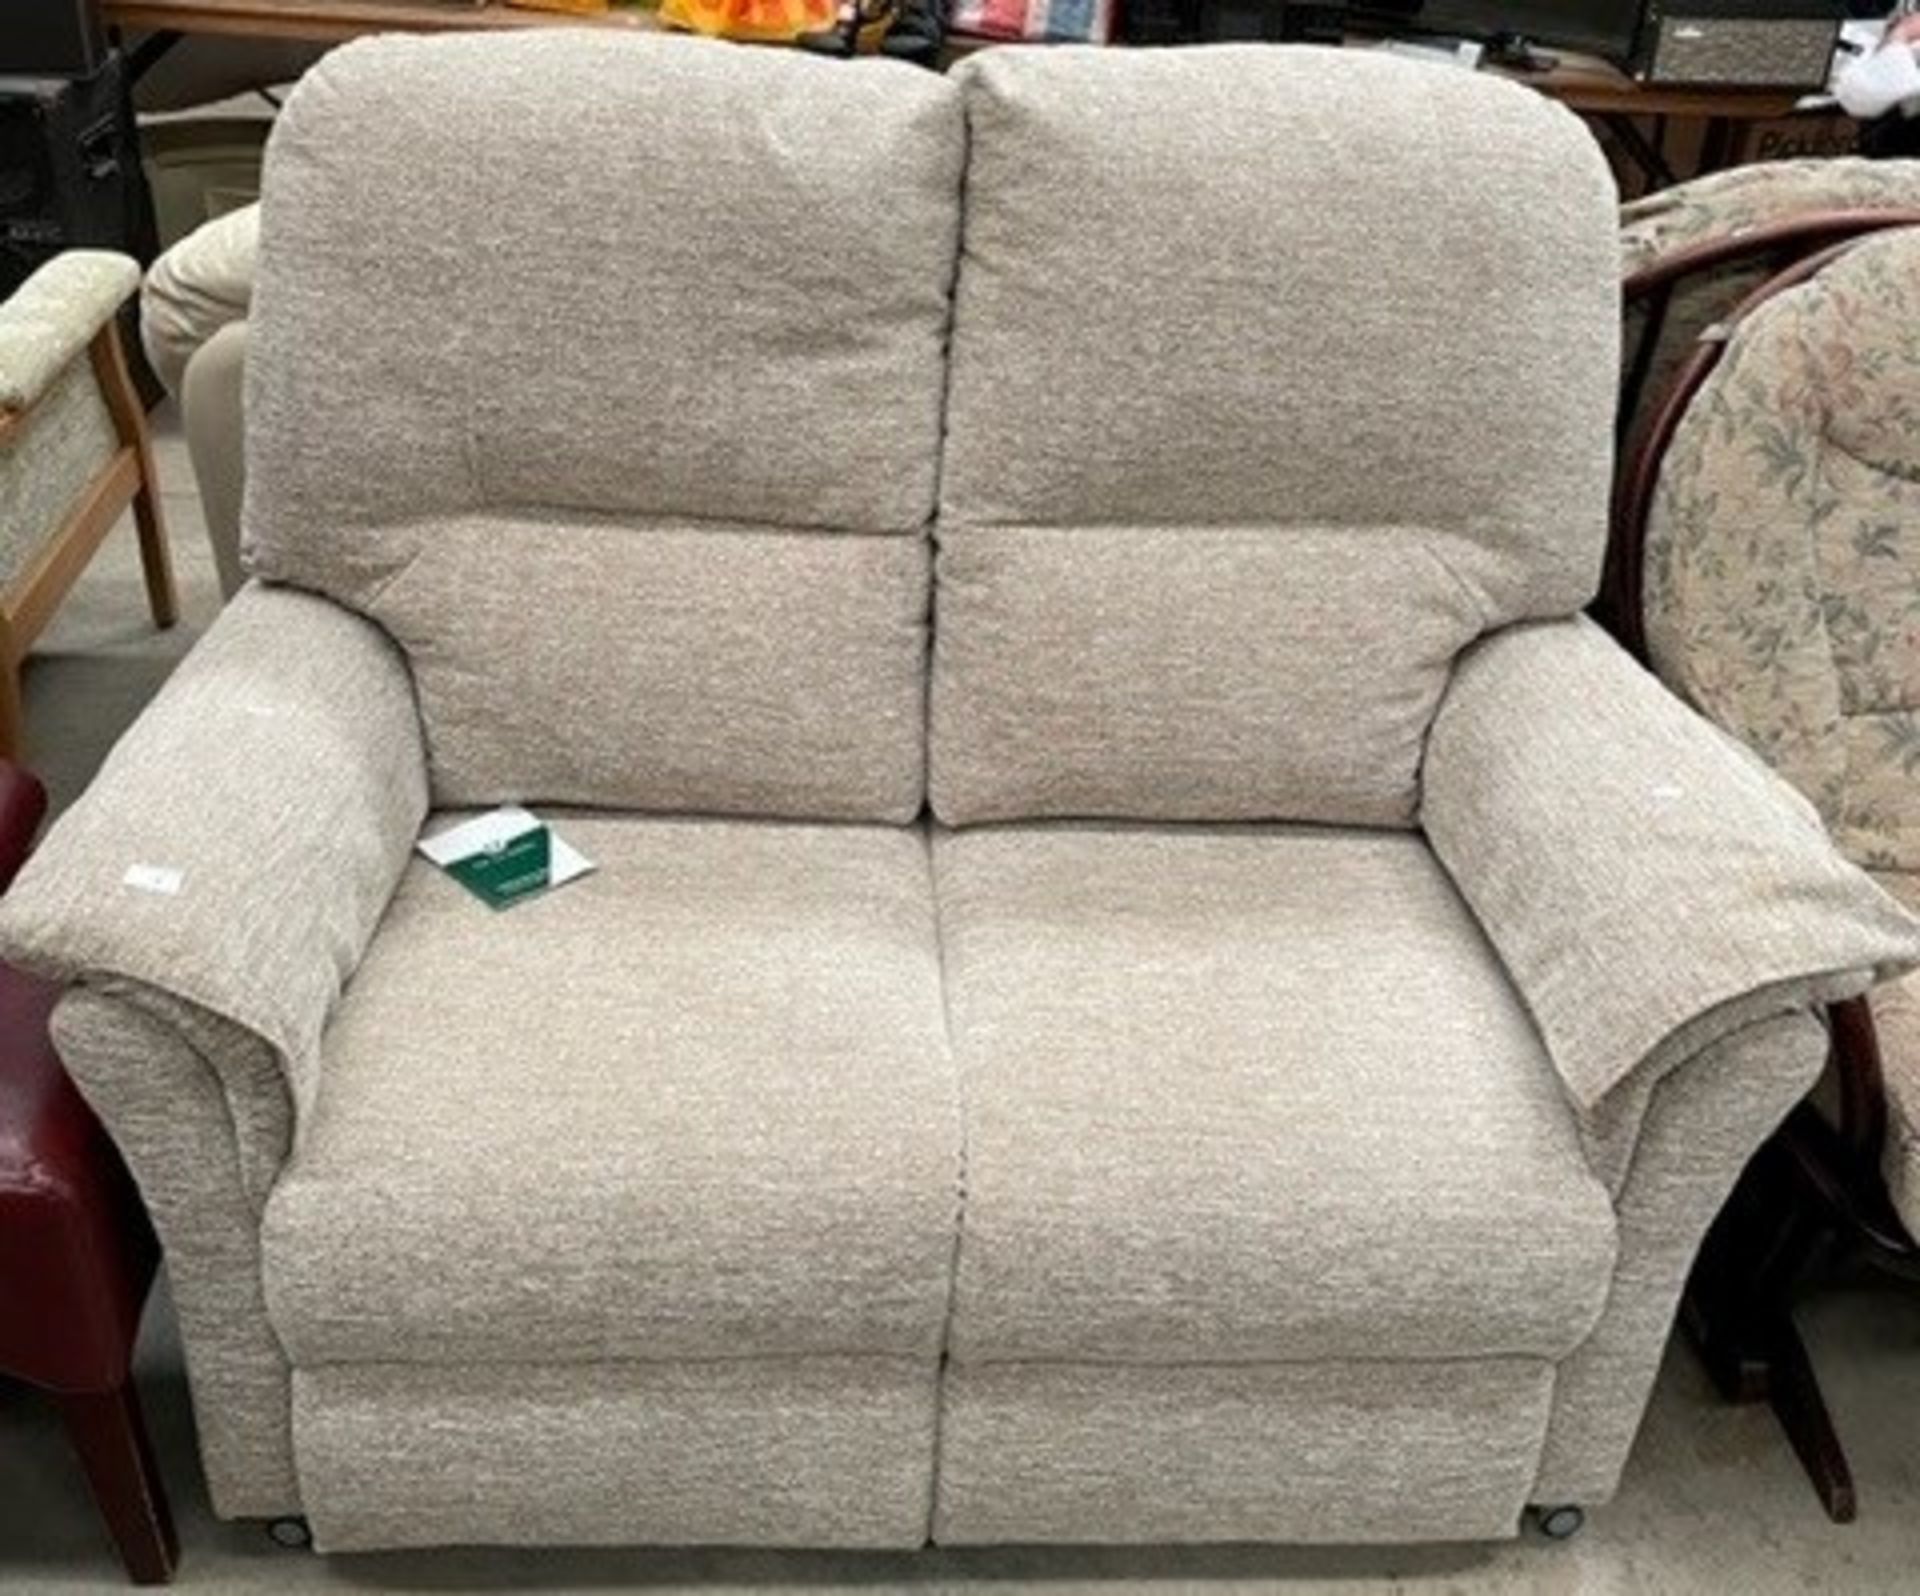 An Oaktree mobility oatmeal upholstered two seater settee - Image 2 of 2